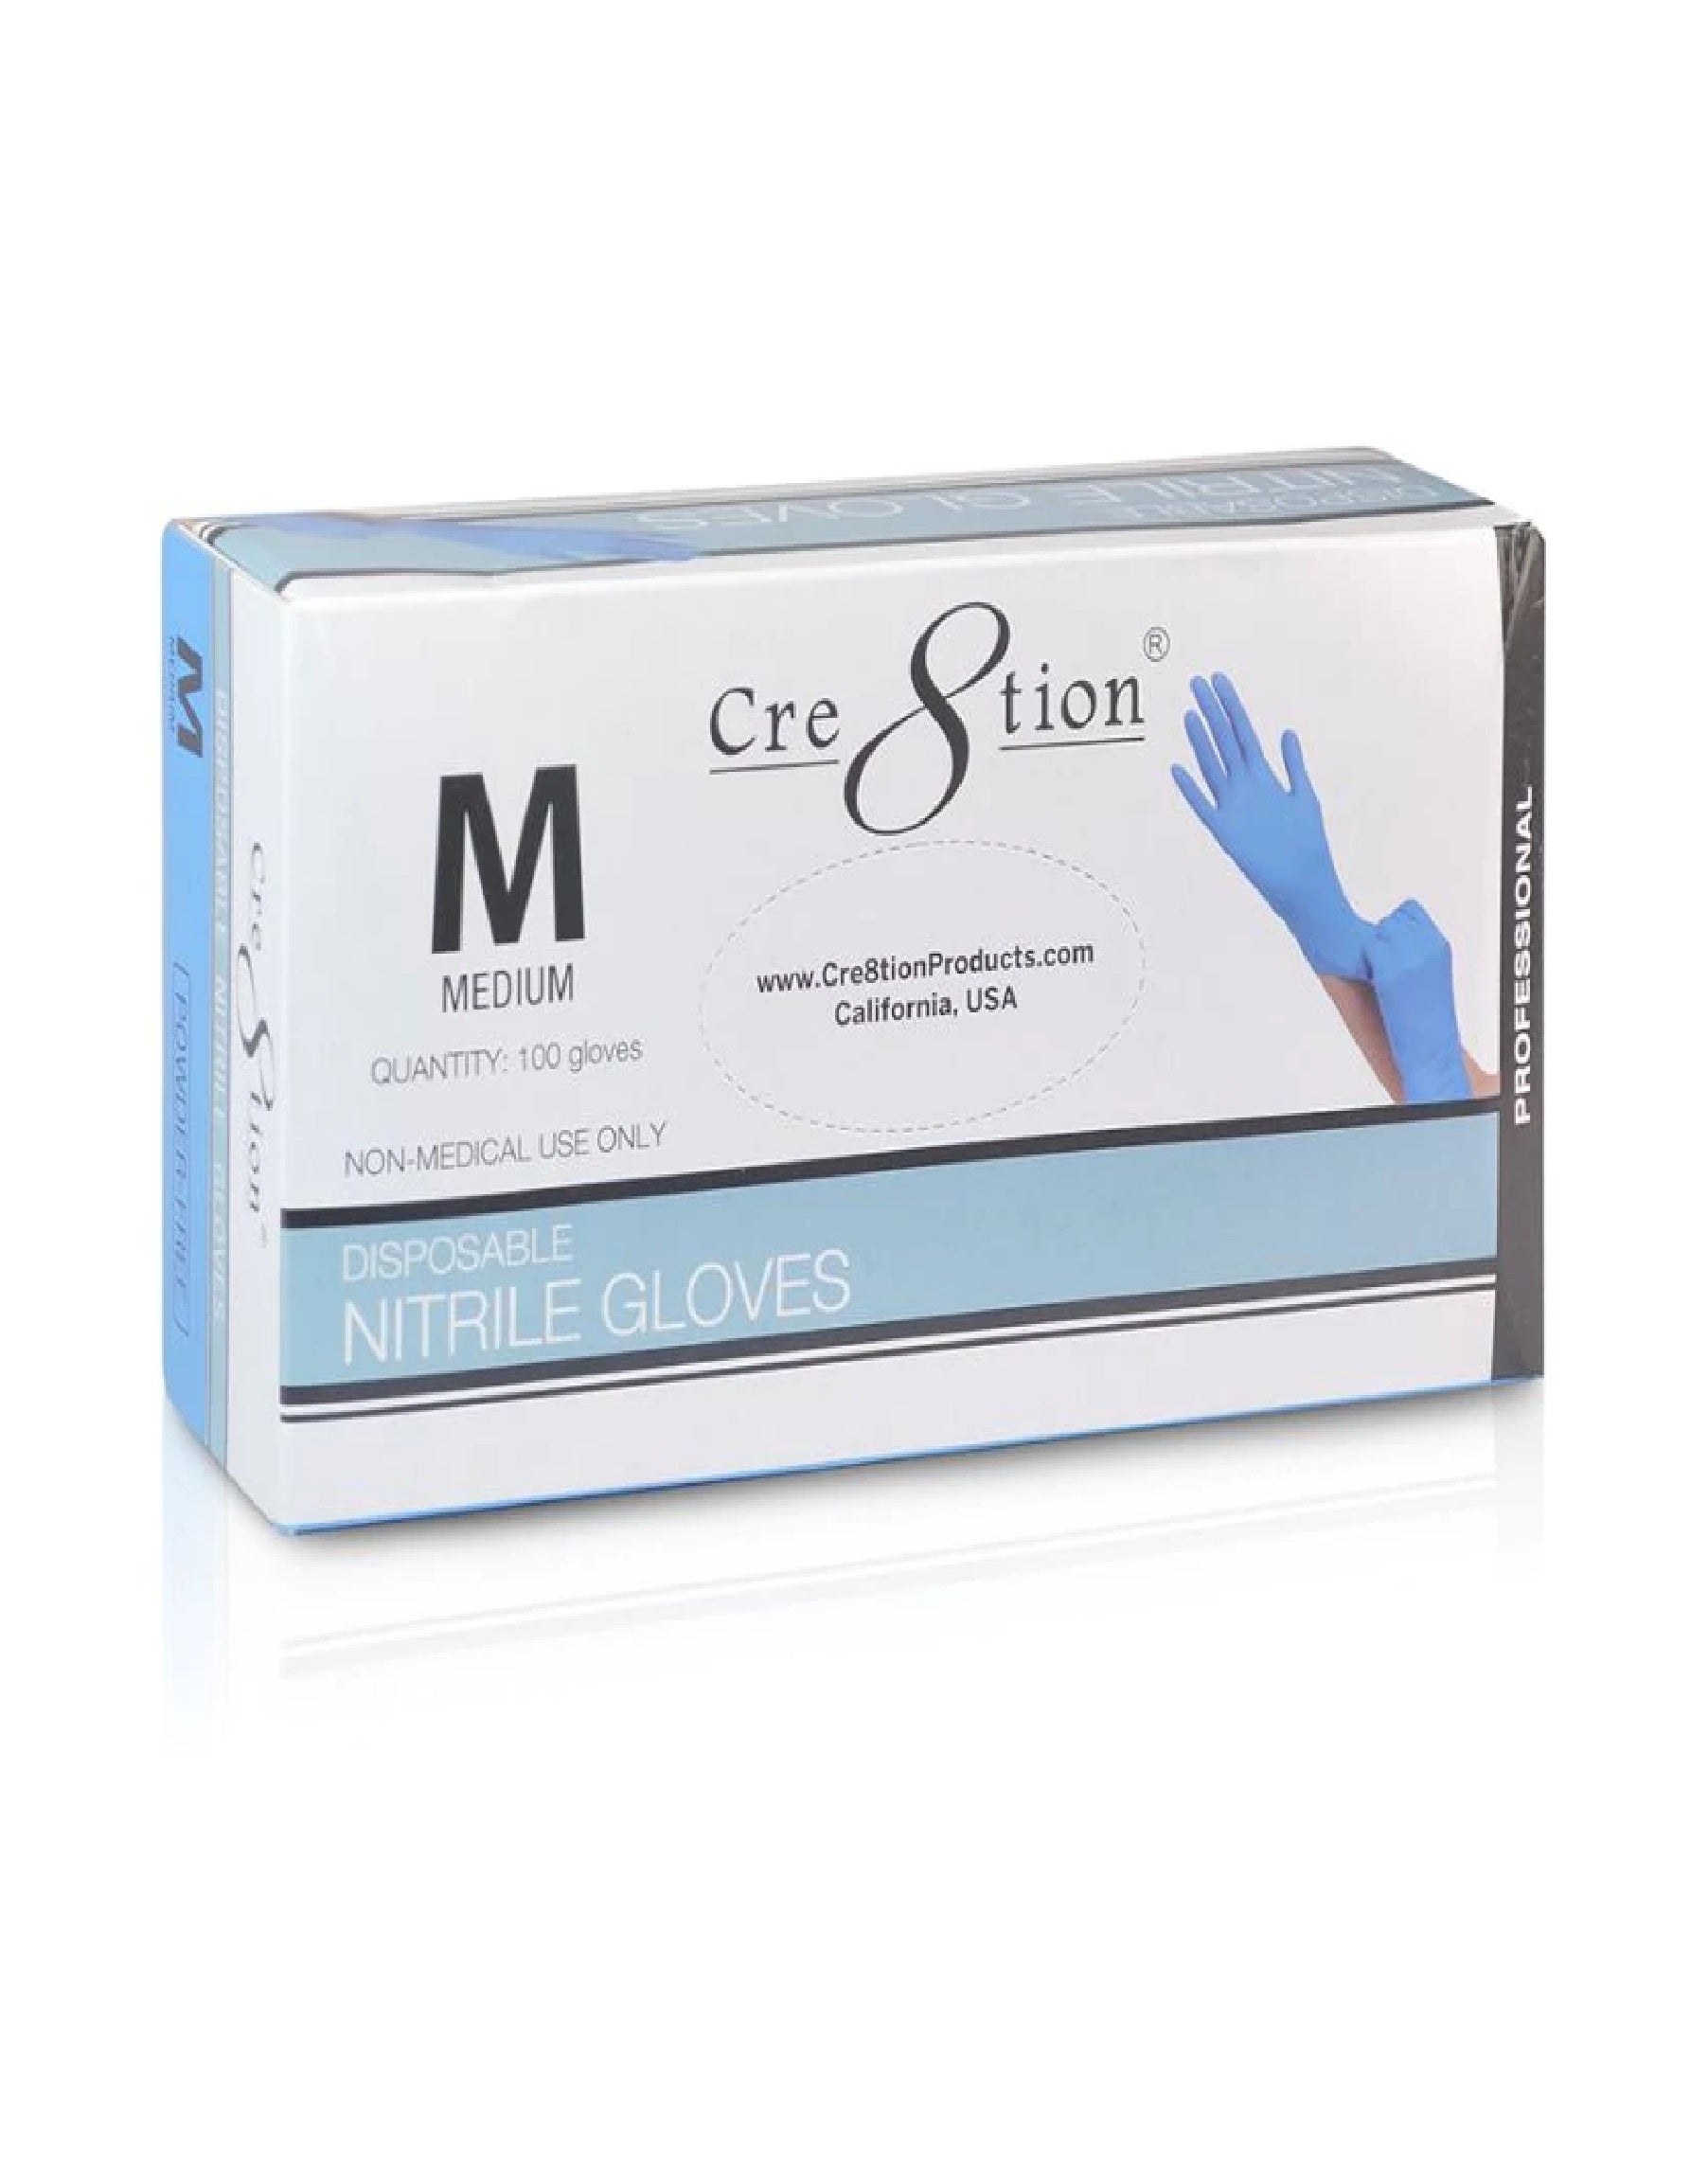 Nitrile Gloves Large 100ct Box - Limited Quantities Available